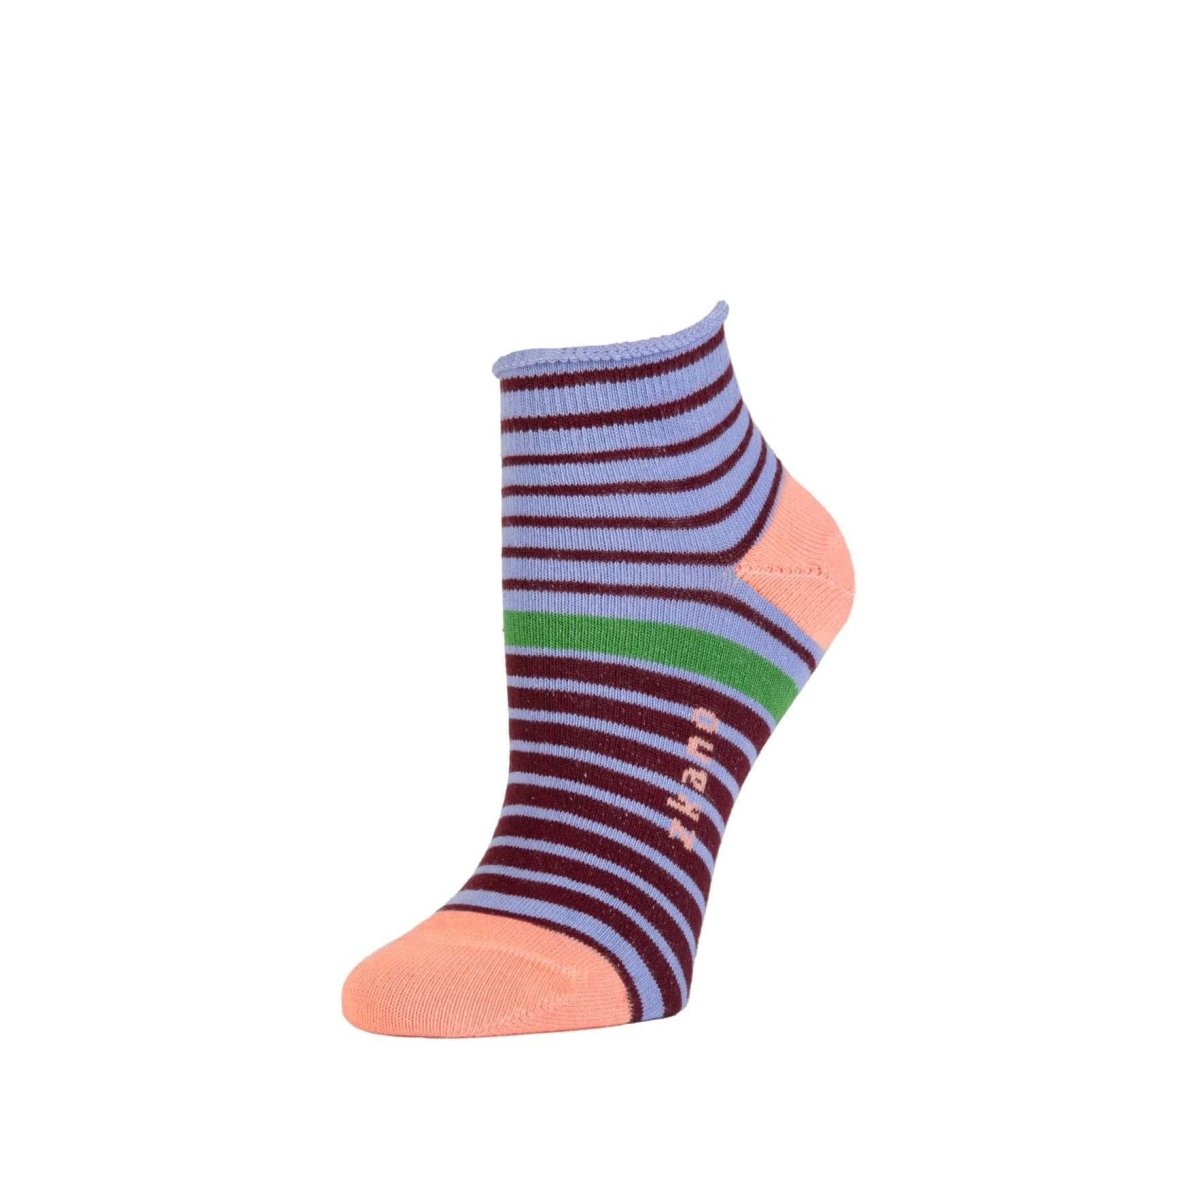 A periwinkle sock with maroon stripes and a singular bright green sock with a light pink toe and heel. The Rosette Anklet in Violet is from Zkano and made in Alabama, USA.